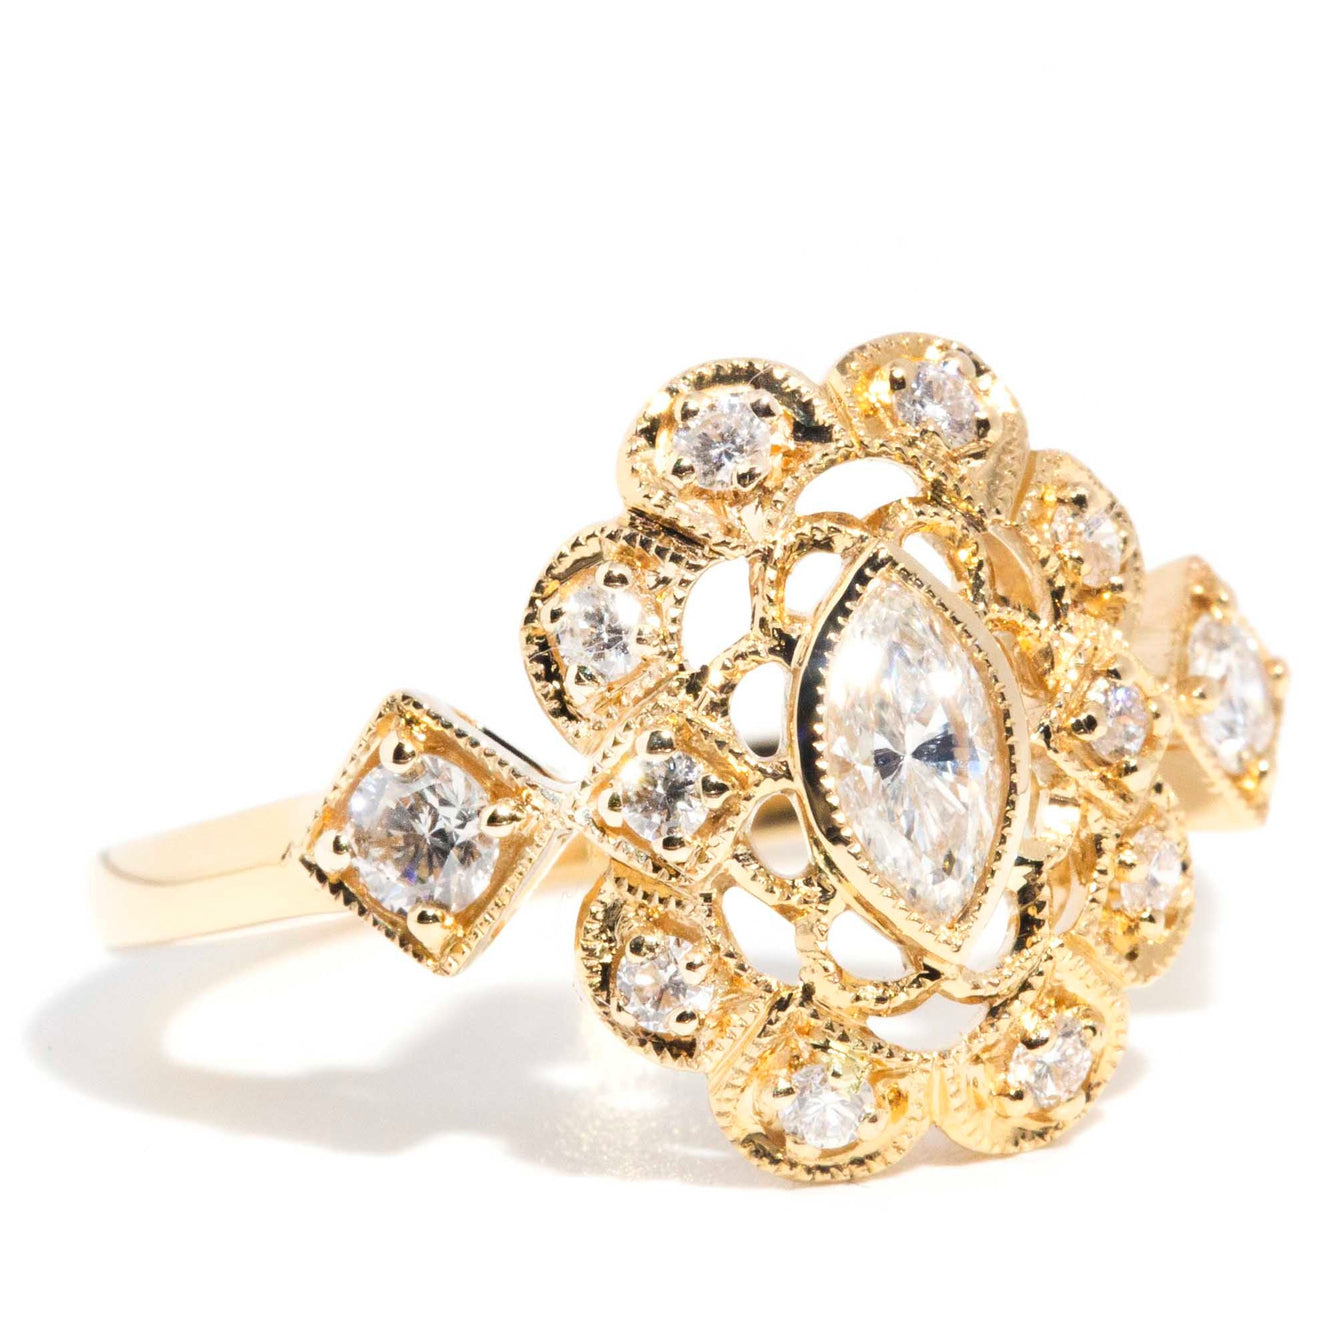 Hillary ADGL Certified 0.57 Carat Diamond 18ct Gold Cluster Ring* OB Rings Imperial Jewellery 